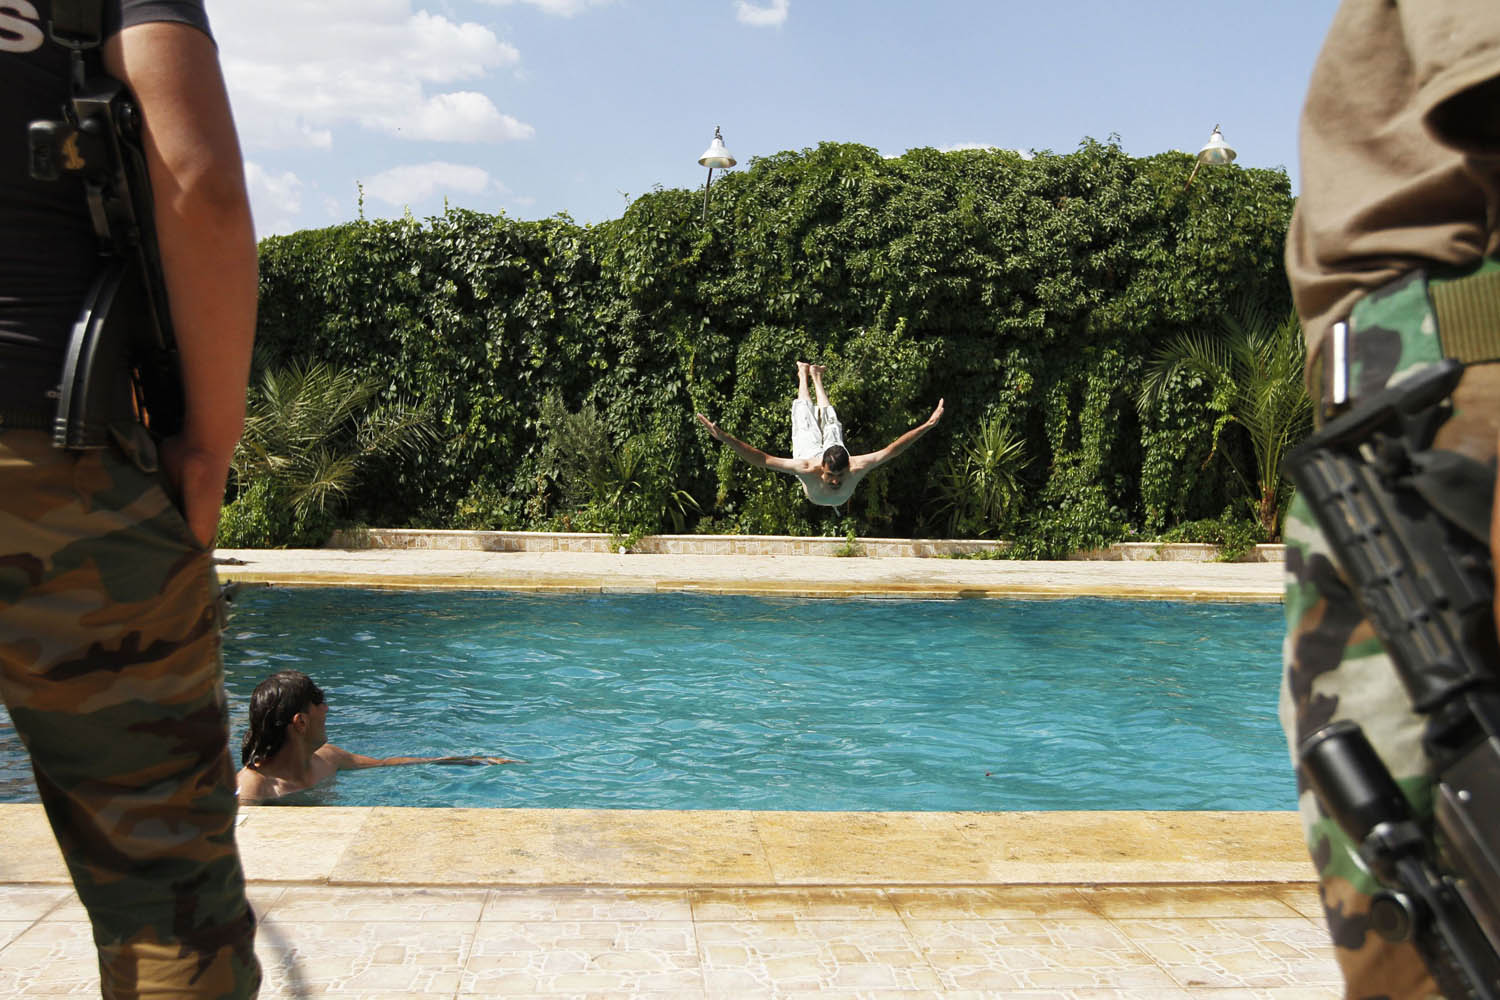 A member of the Free Syrian Army dives into a swimming pool in Aleppo